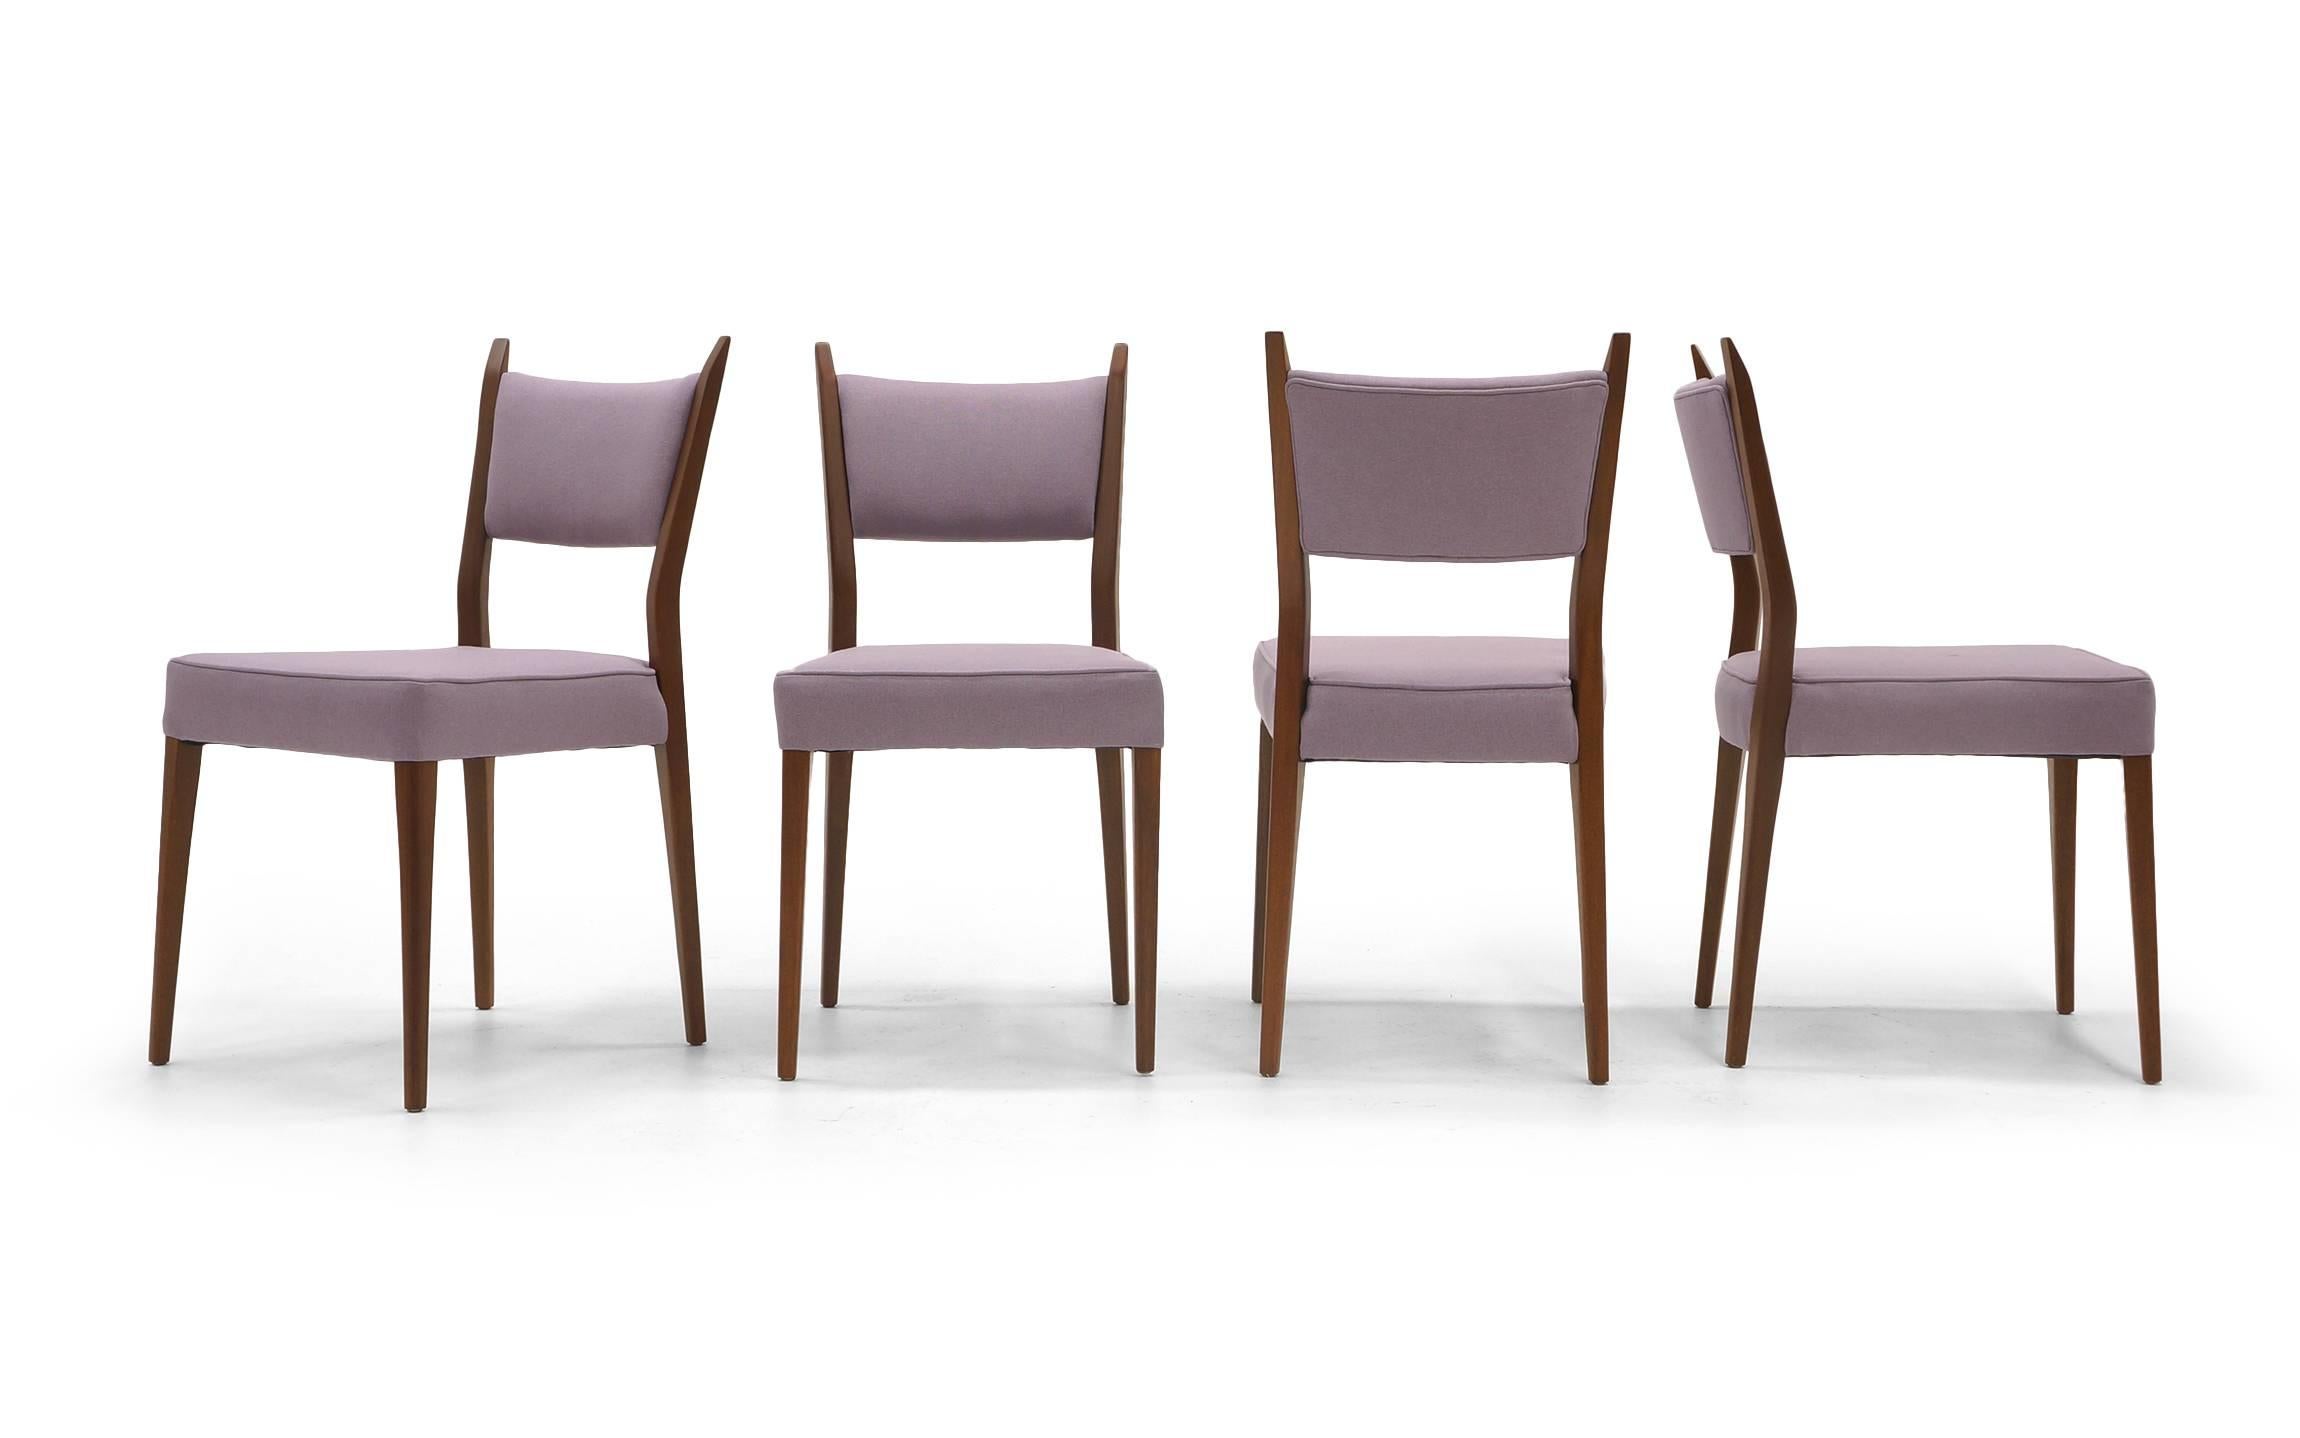 American Set of Ten Dining Chairs by Paul McCobb for Calvin, New Lavender Upholstery